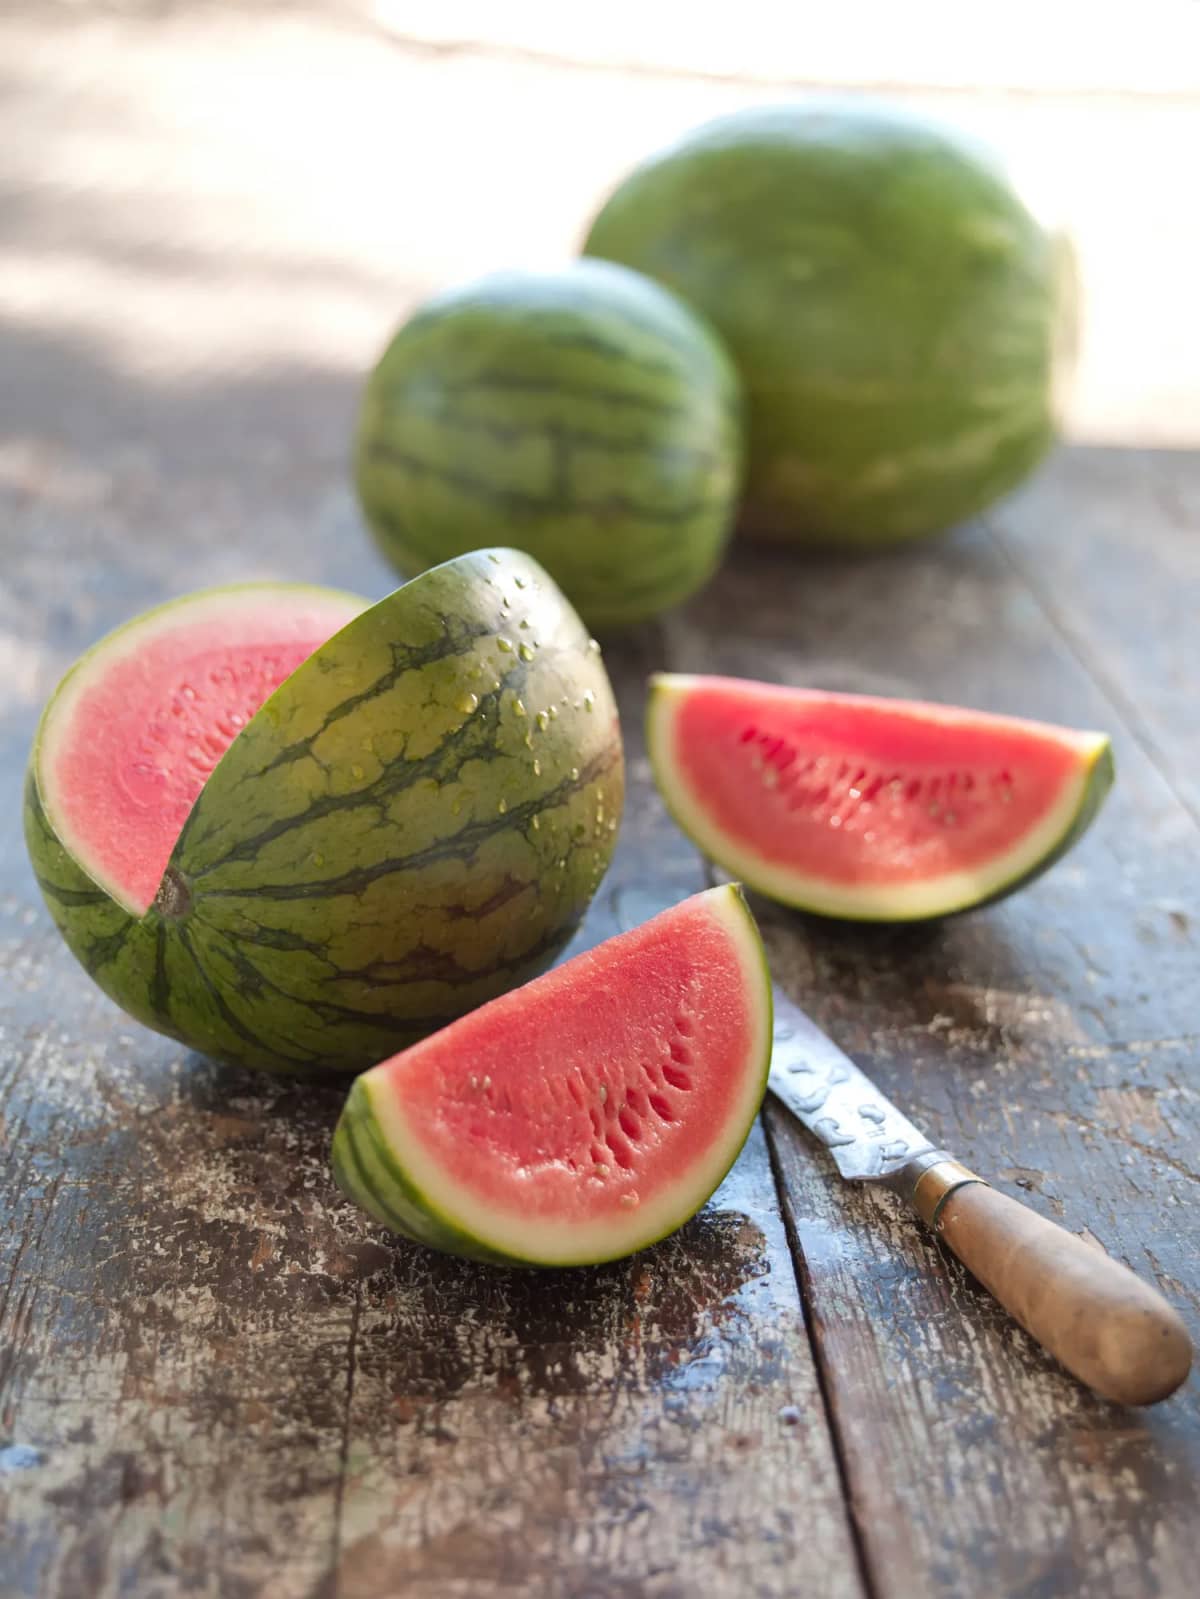 Whole and cut watermelons next to knife